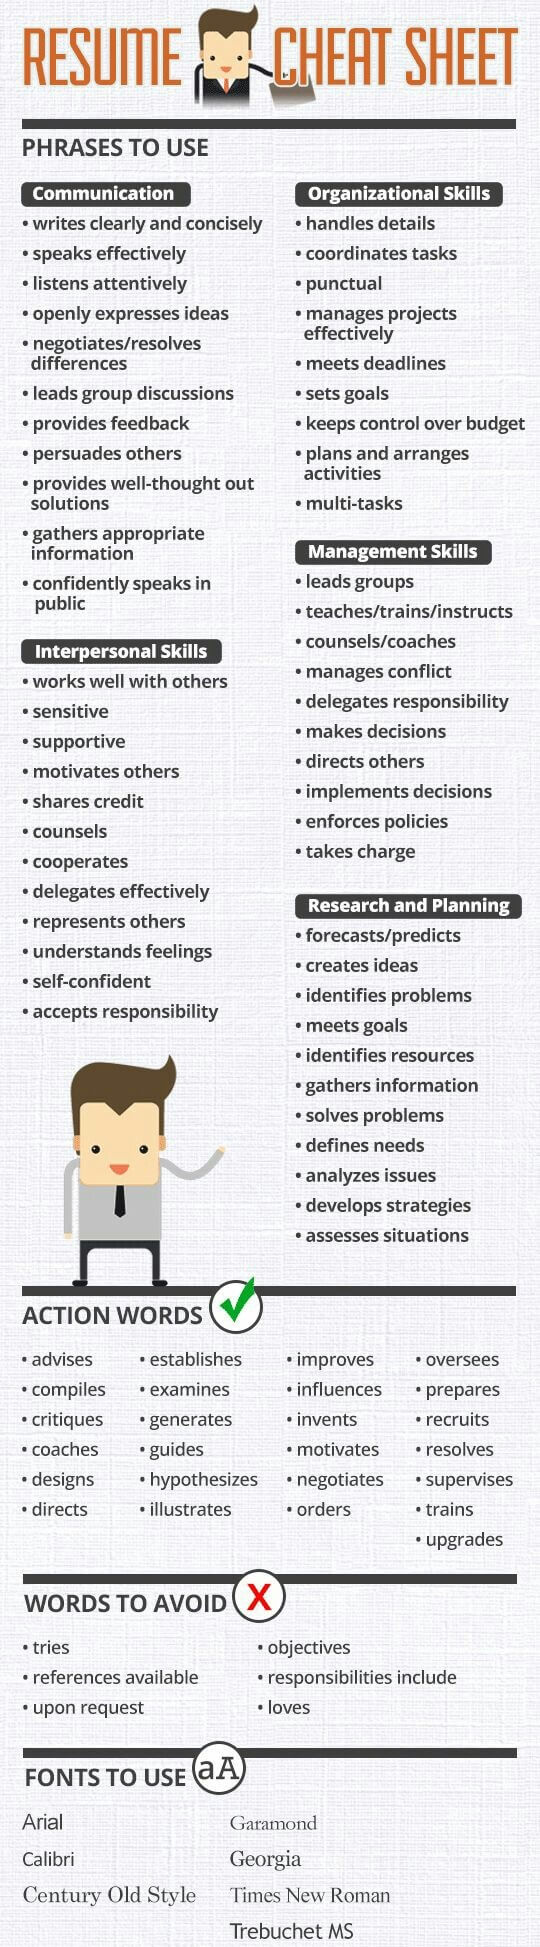 Handy Guide For Writing A Resume